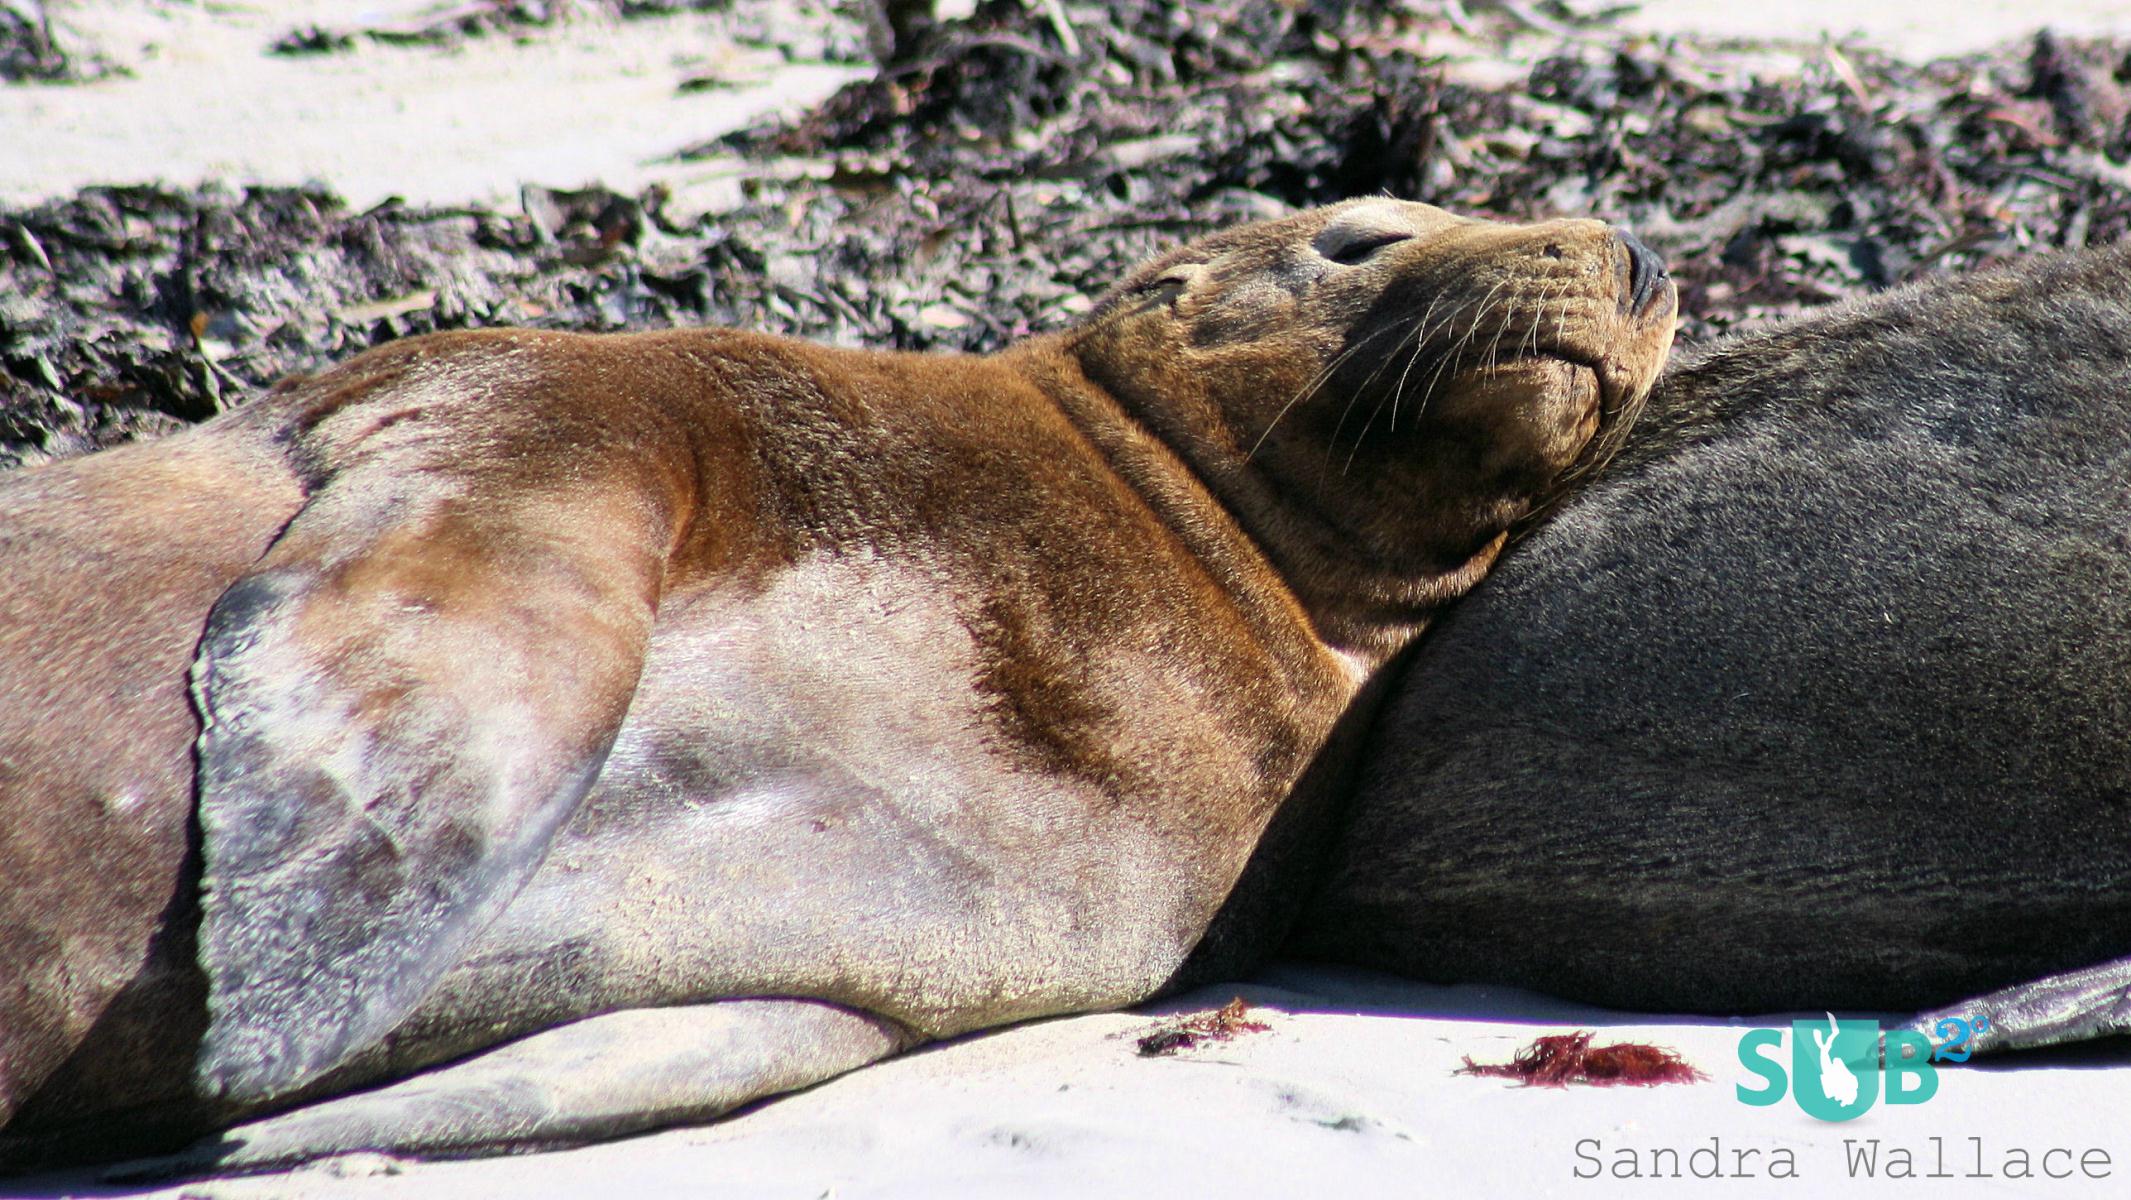 The voluptuous Australian Sea Lion getting comfy on his fellow seal. 